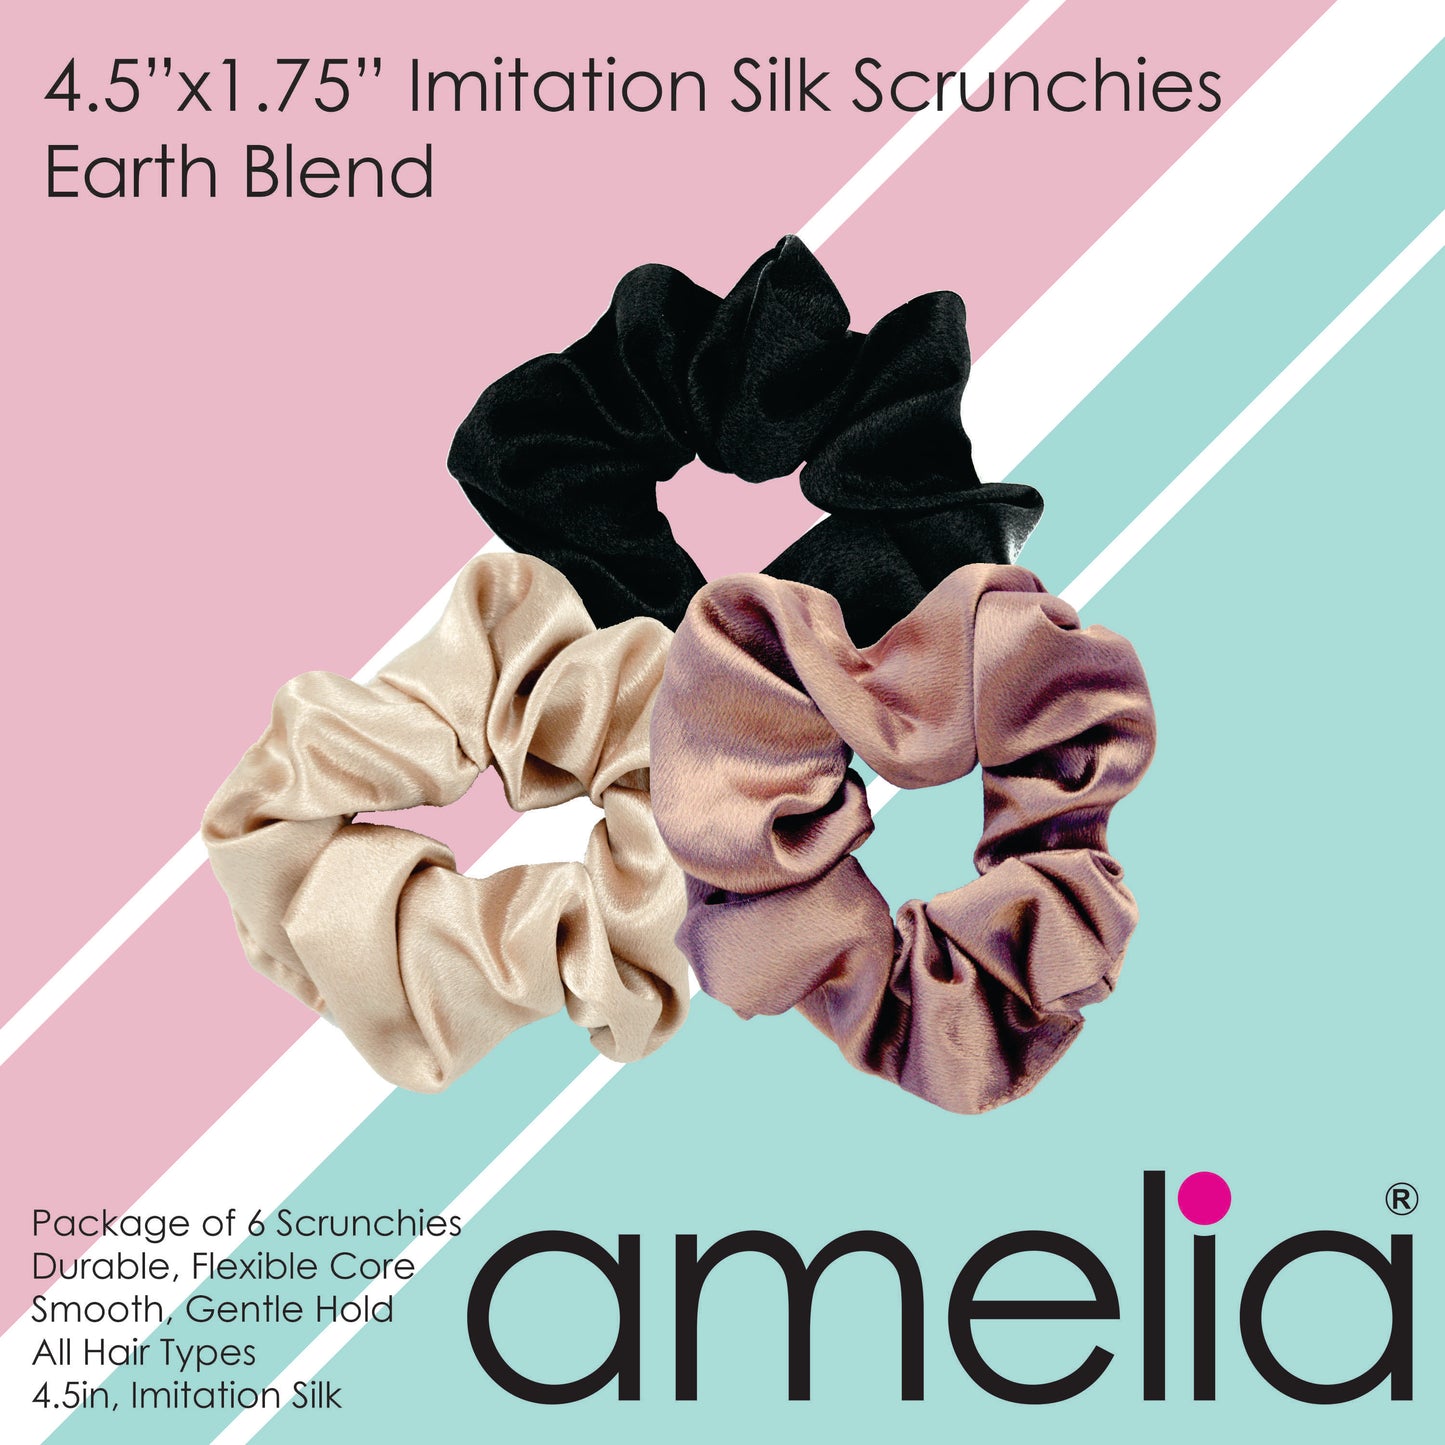 Amelia Beauty, Earth Tones Imitation Silk Scrunchies, 4.5in Diameter, Gentle on Hair, Strong Hold, No Snag, No Dents or Creases. 6 Pack